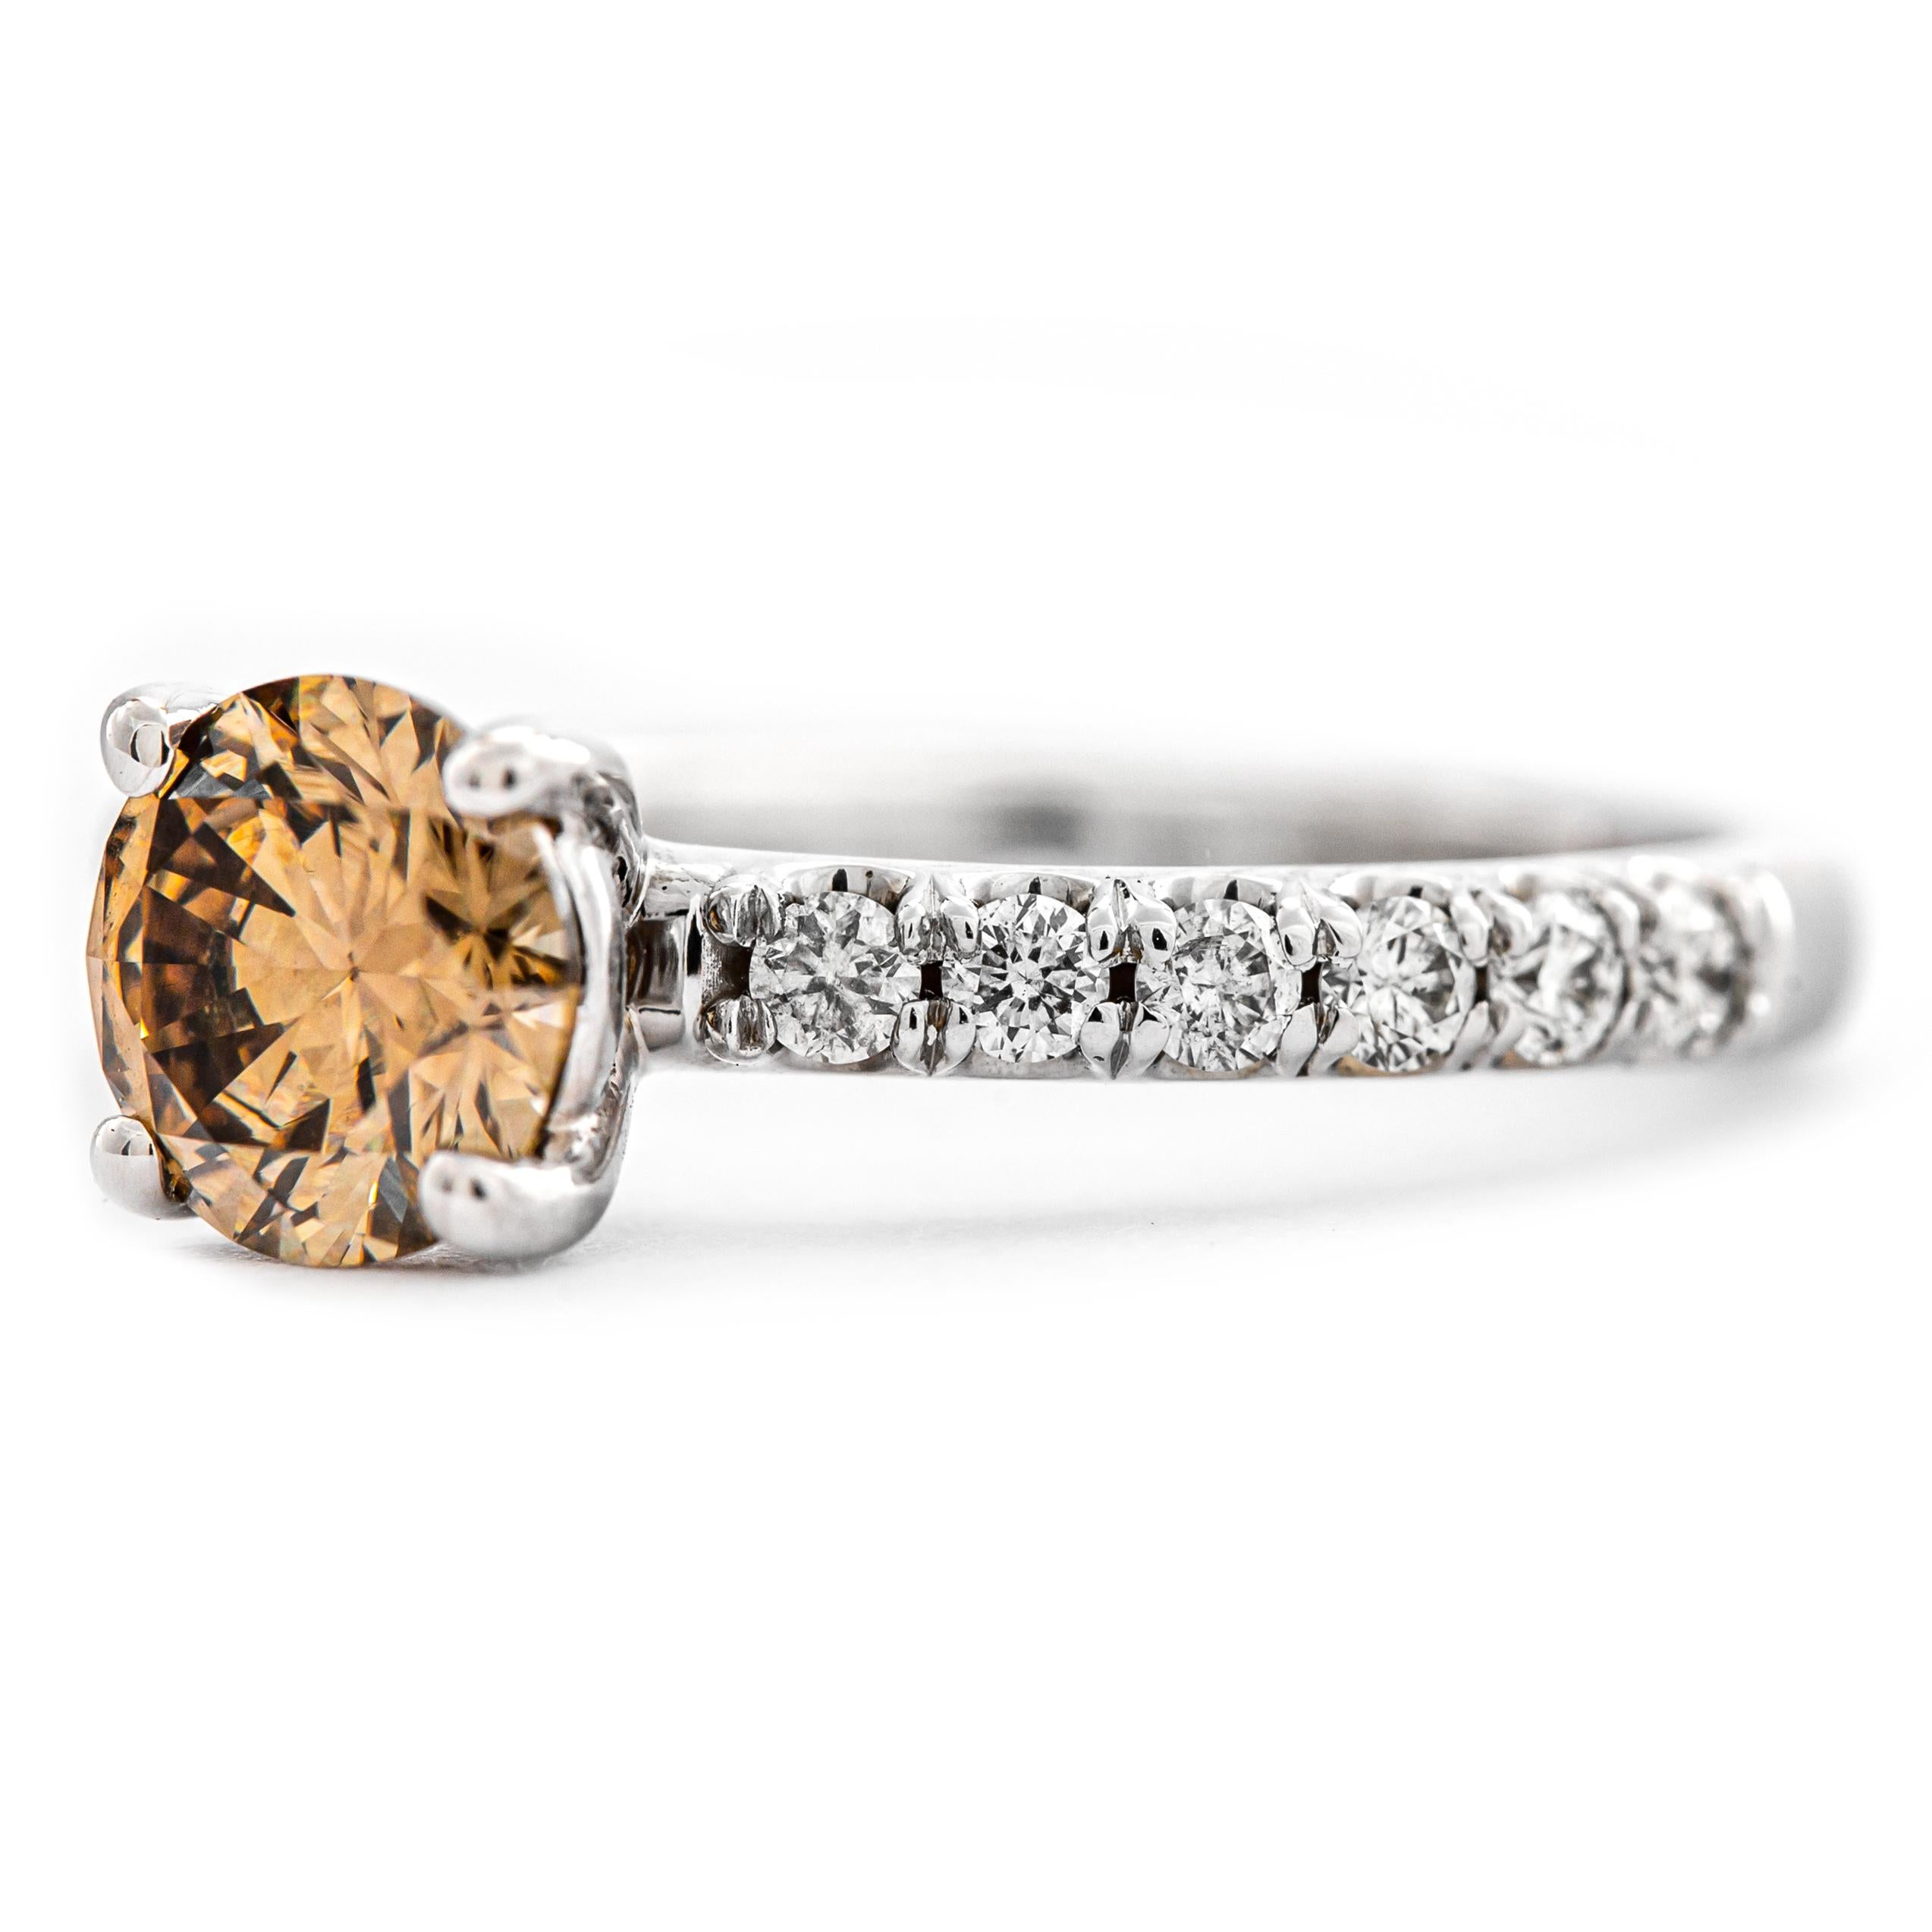 Modern 1.11 ct Natural Fancy Deep Yellow Brown Diamond Ring, No Reserve Price